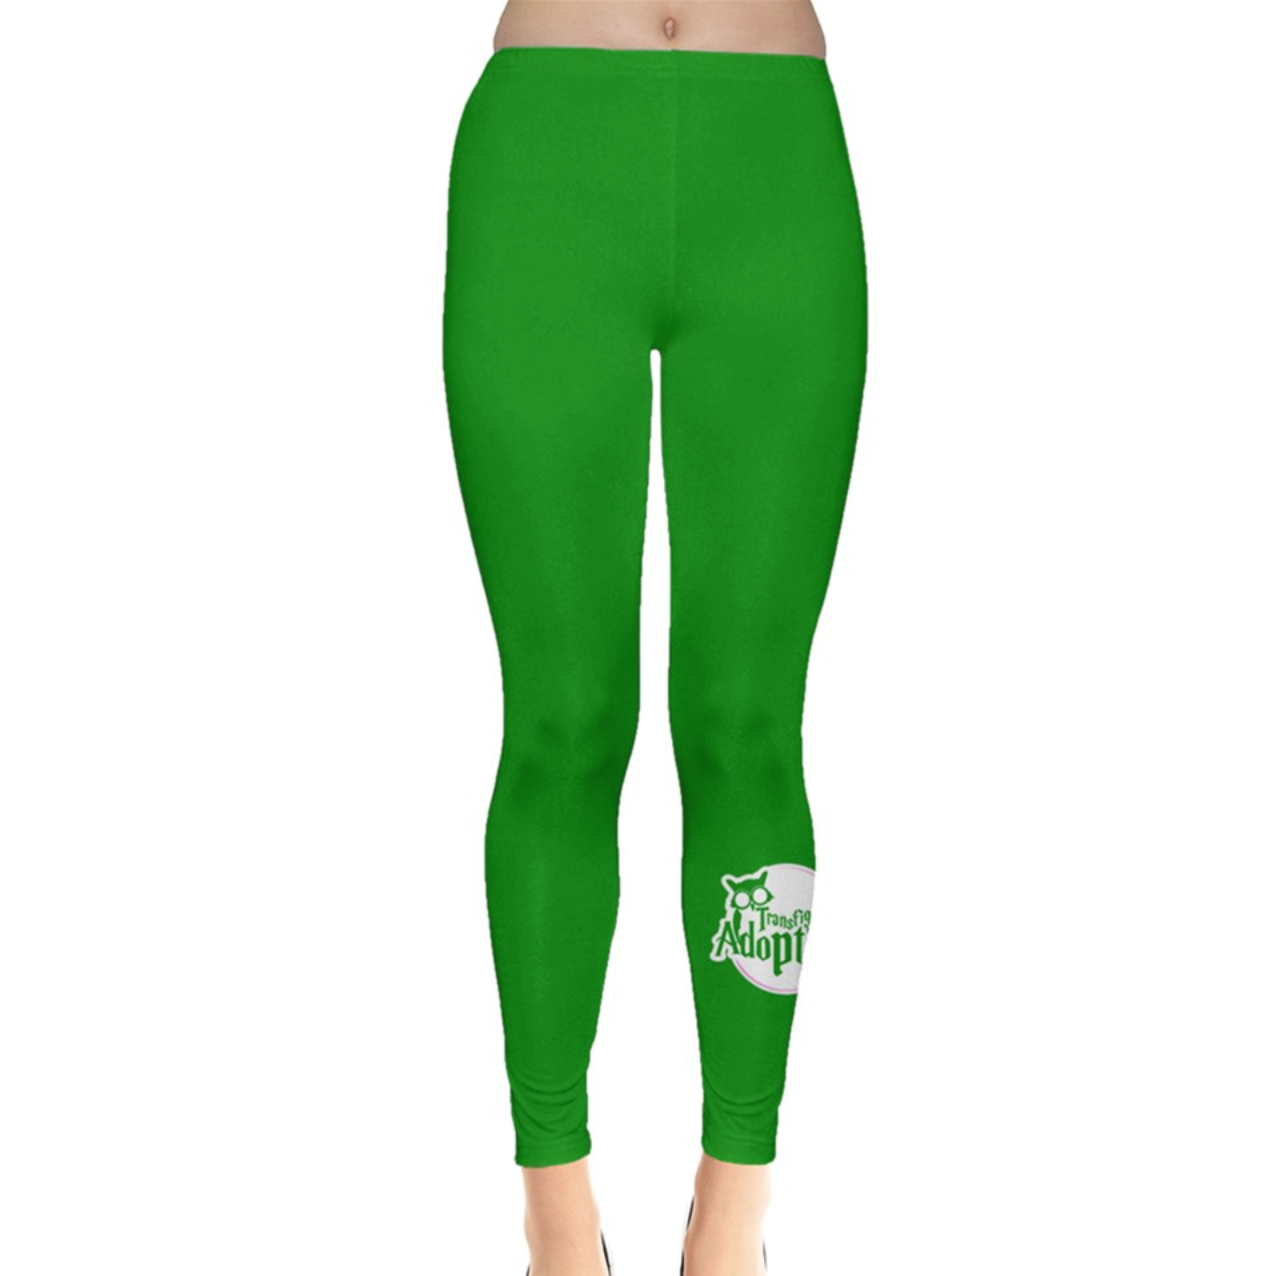 Candy Store Leggings (Green)